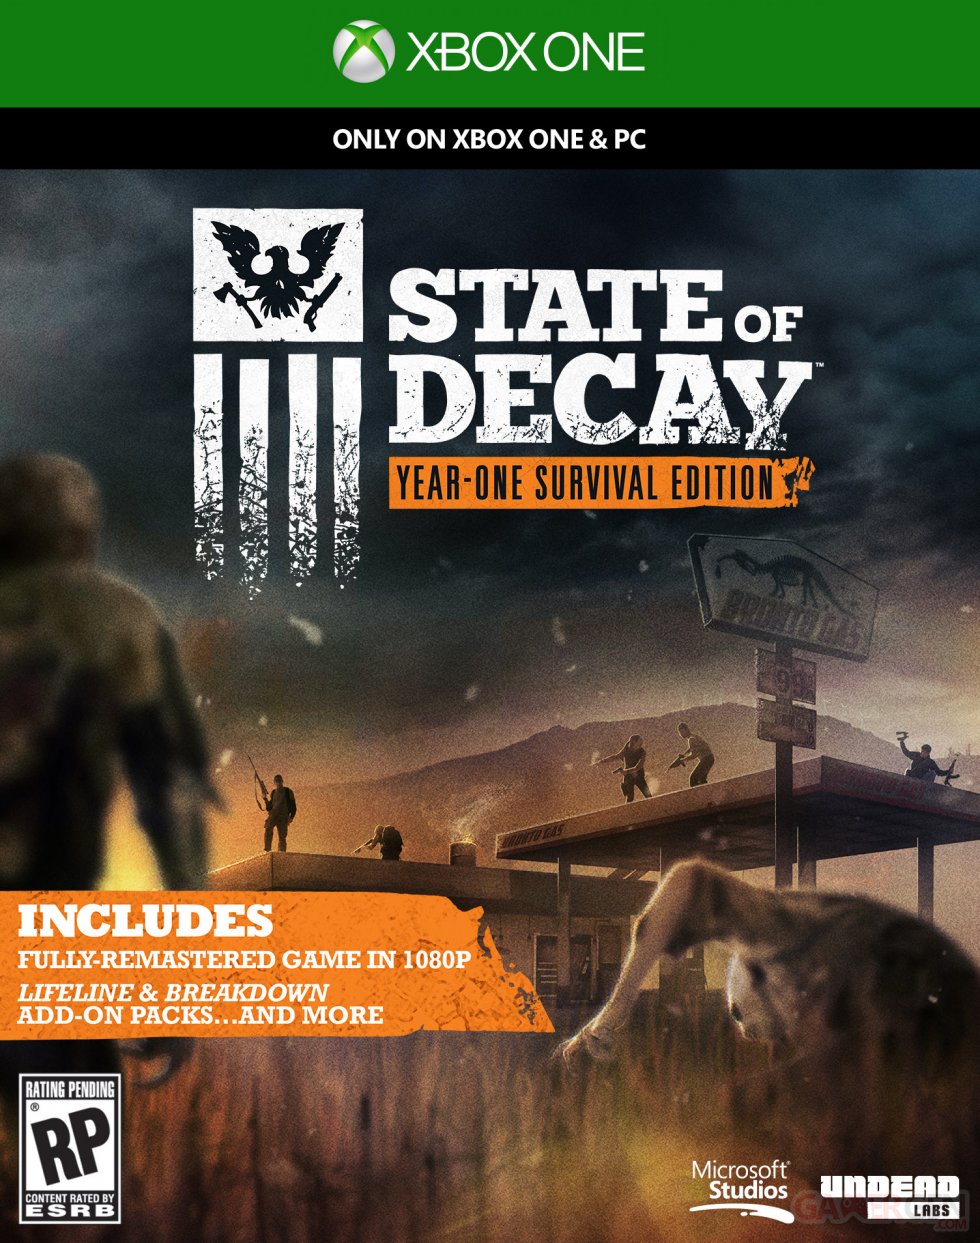 States-of-Decay-Year-One-Survival-Edition_29-08-2014_jaquette